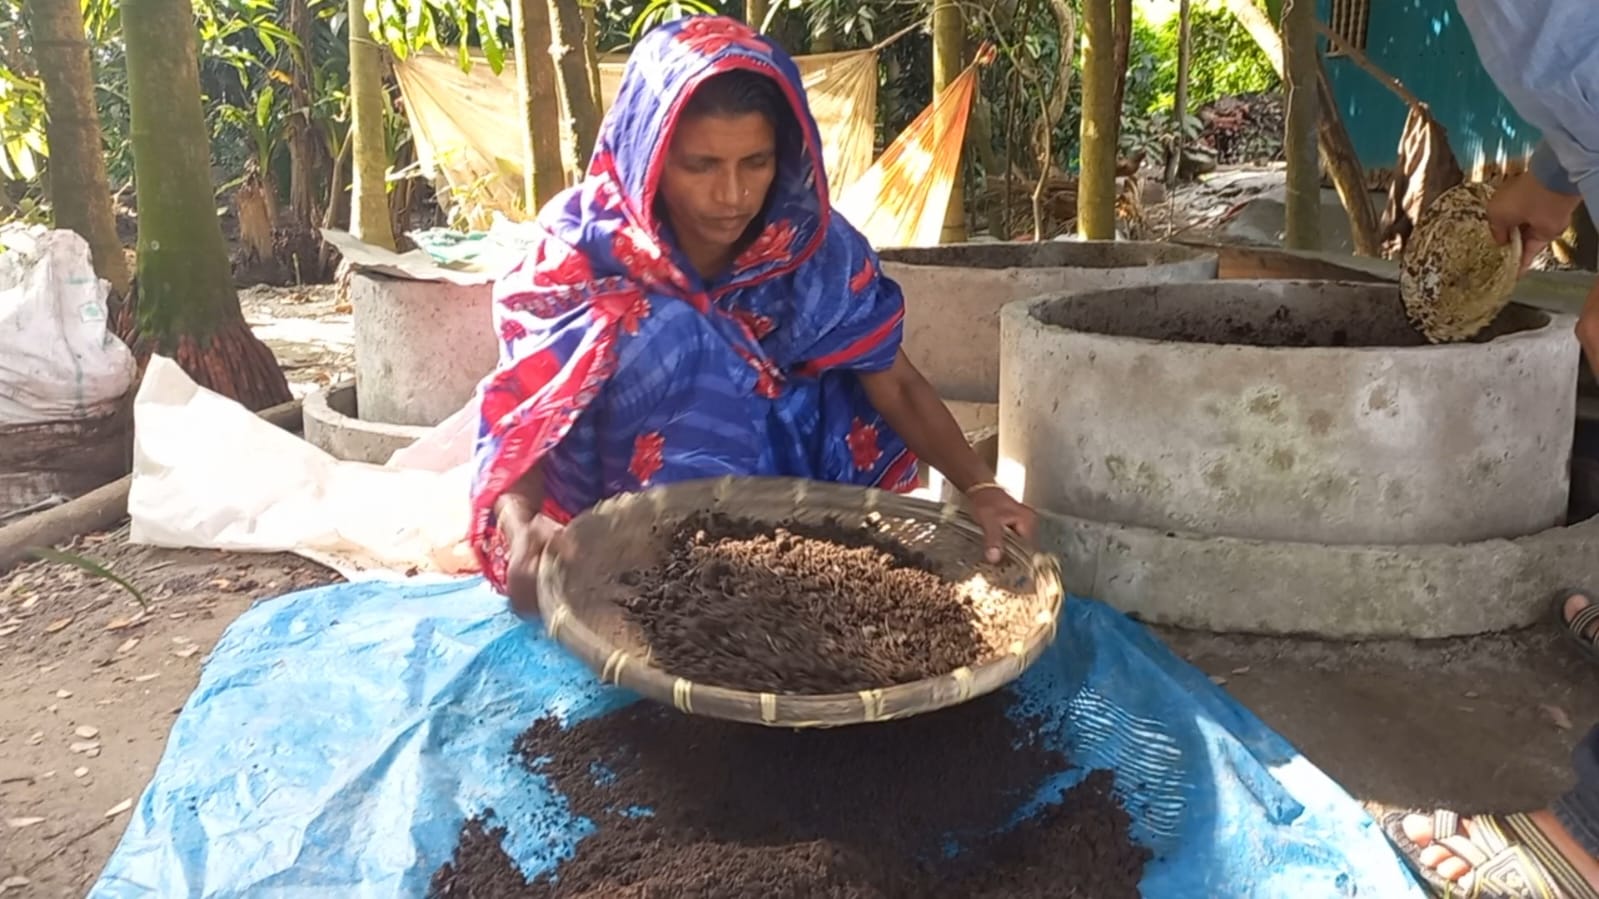 Amena Begum sifts her harvested vermicompost over a blue tarp.